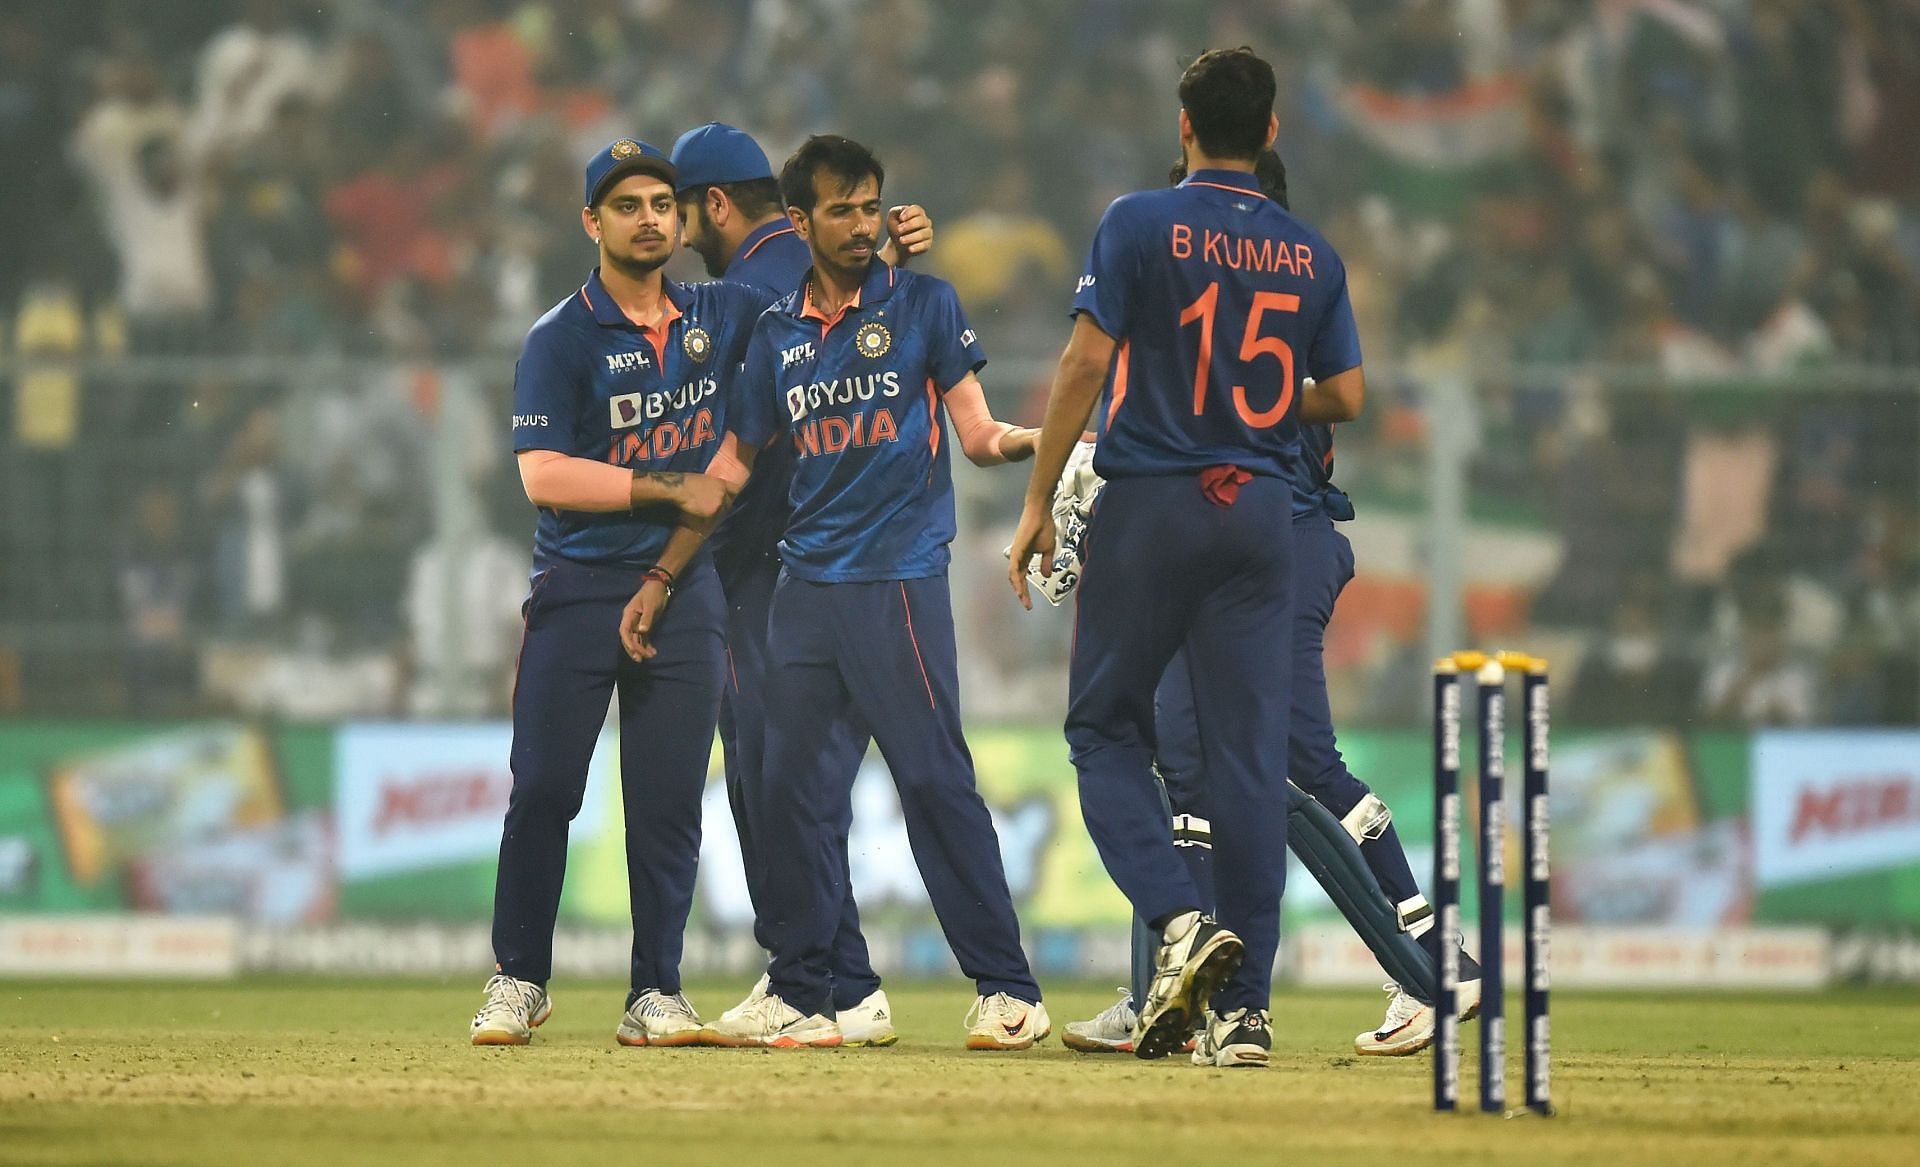 Yuzvendra Chahal celebrates a wicket with teammates. Pic: Getty Images